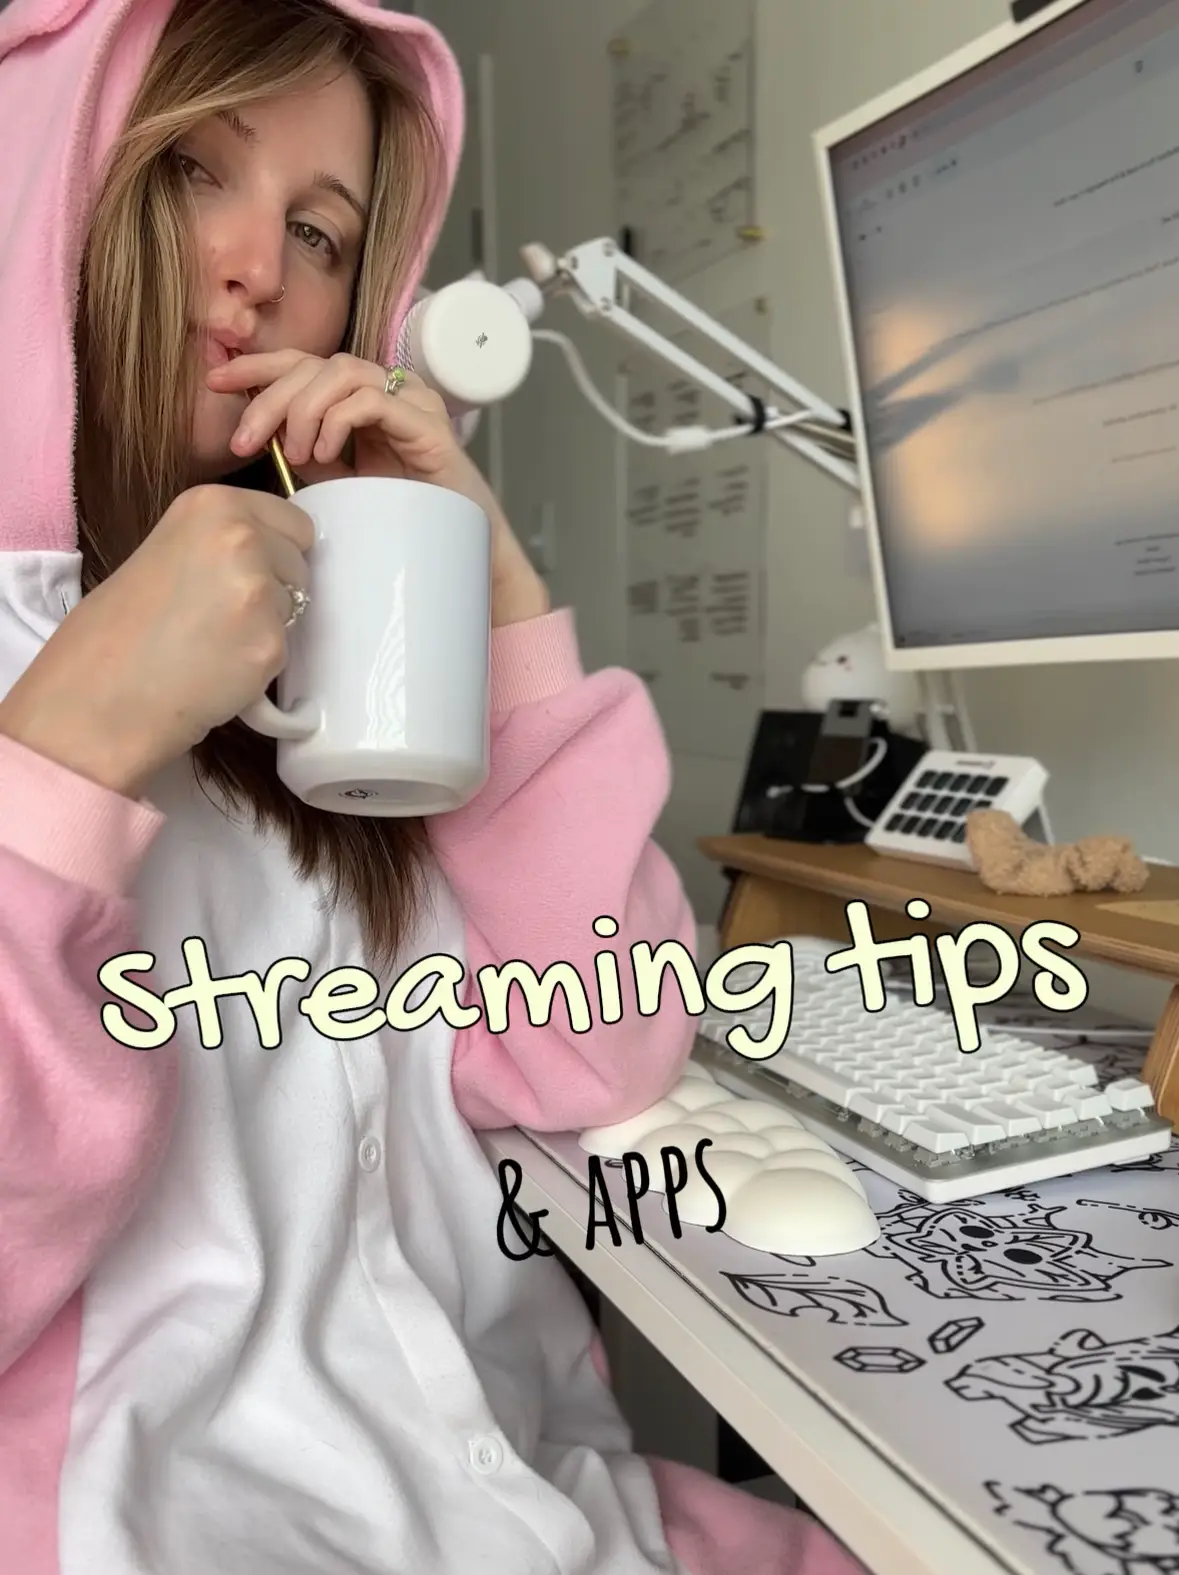 Stream tips's images